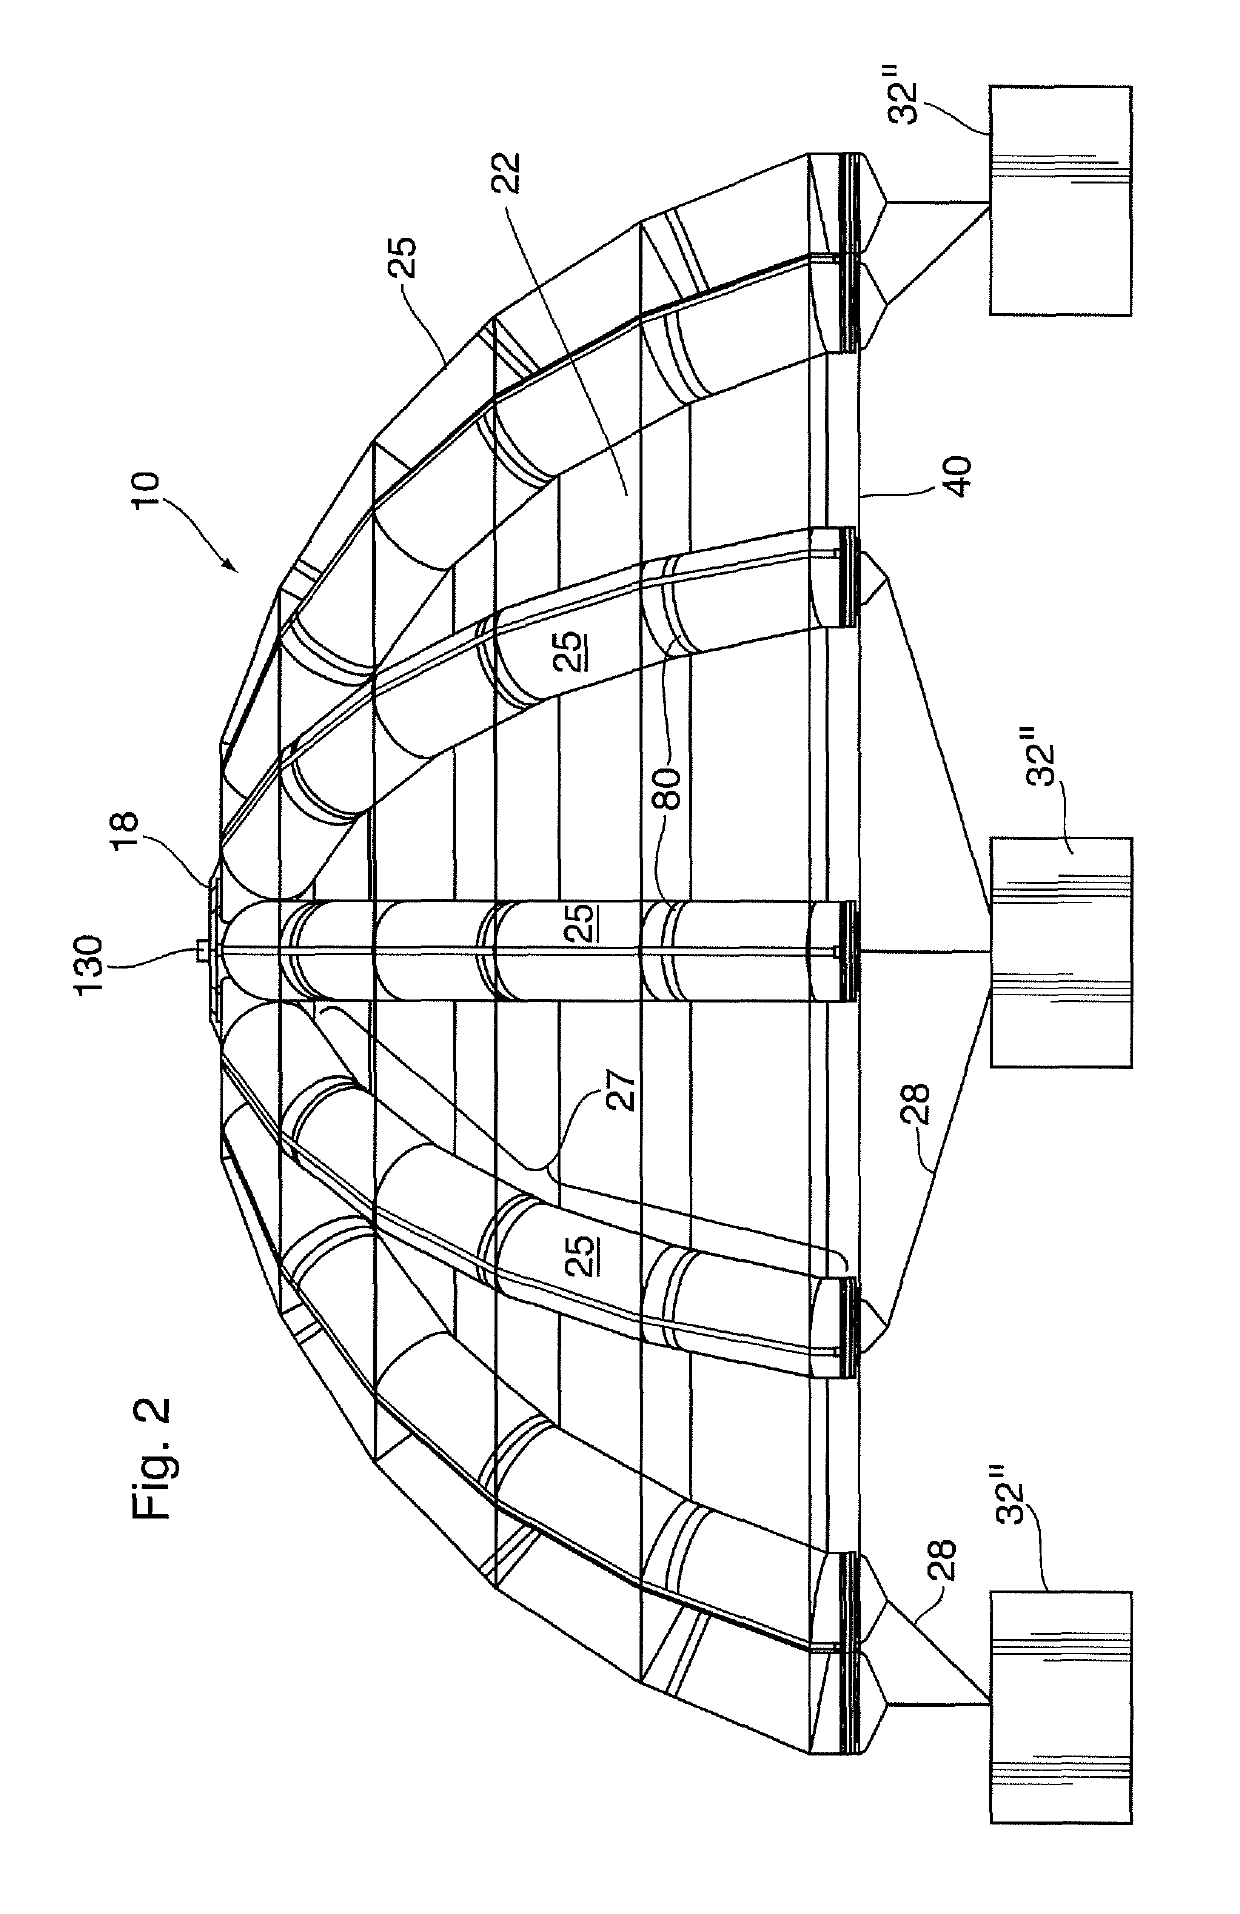 Structure with supporting inflatable beam members, and method for containing and recovering hydrocarbons or toxic fluids leaking from a compromised sub-sea structure